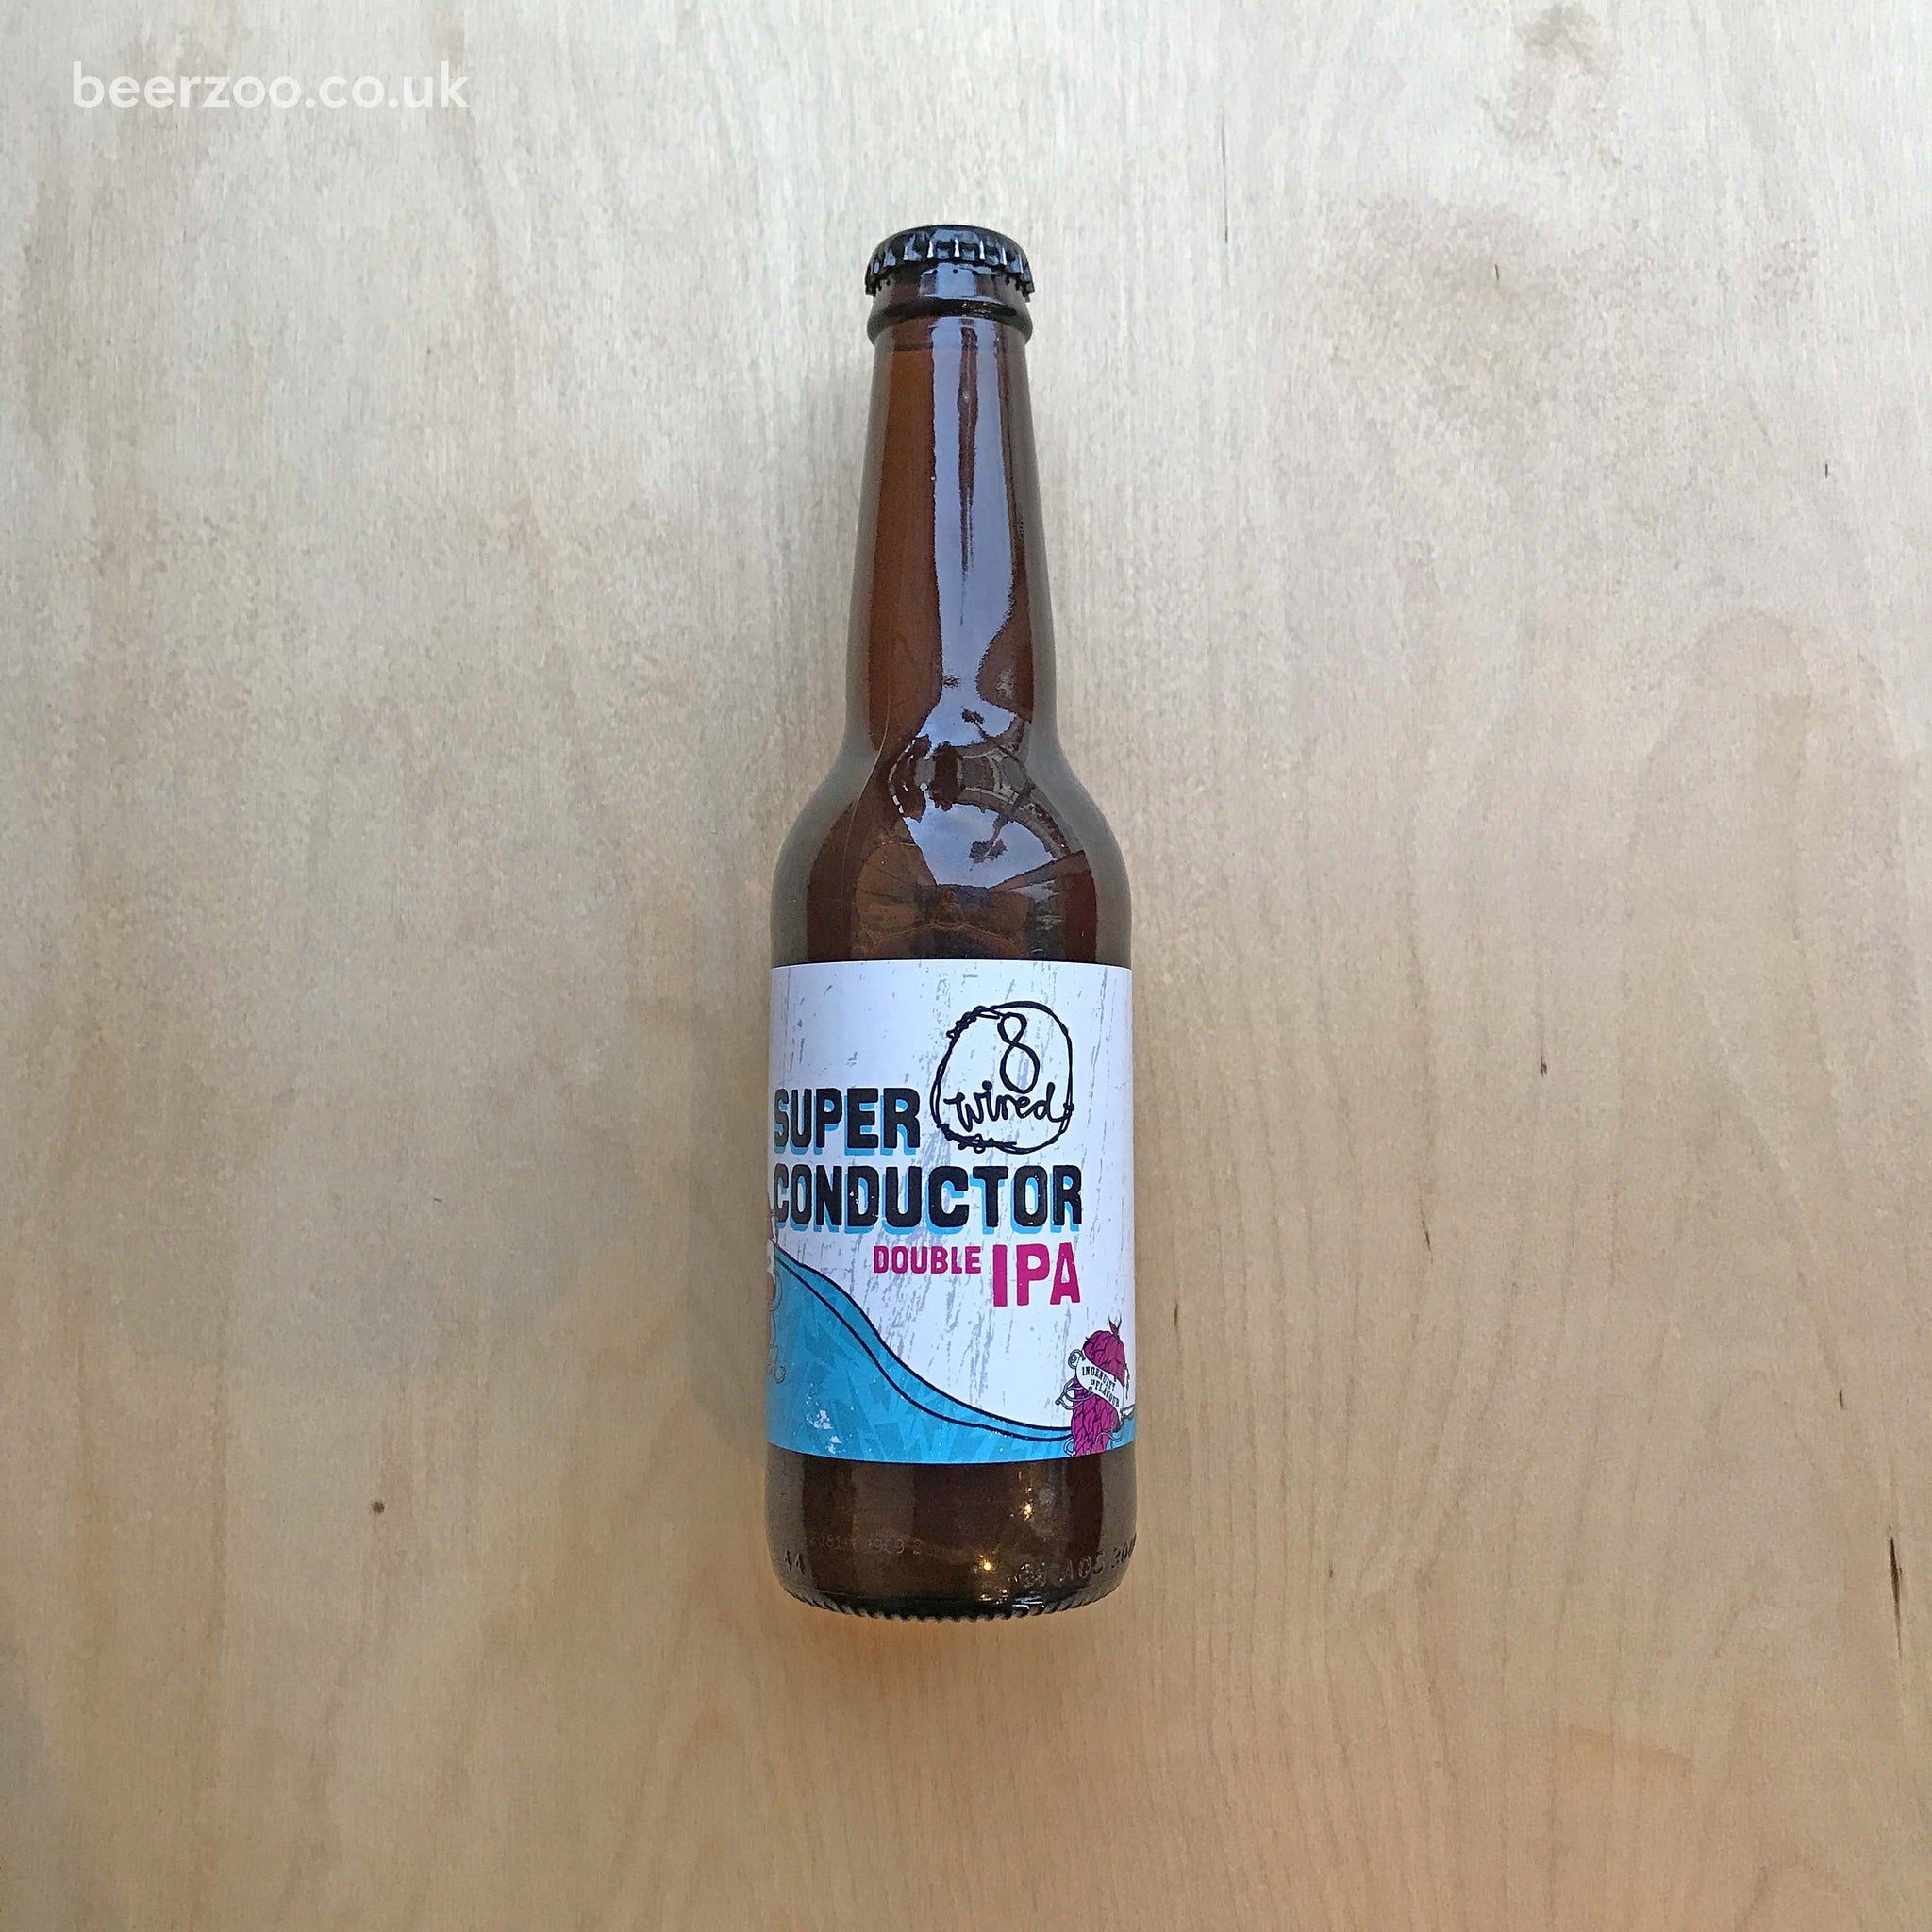 8 Wired - Superconductor 8.8% (330ml)